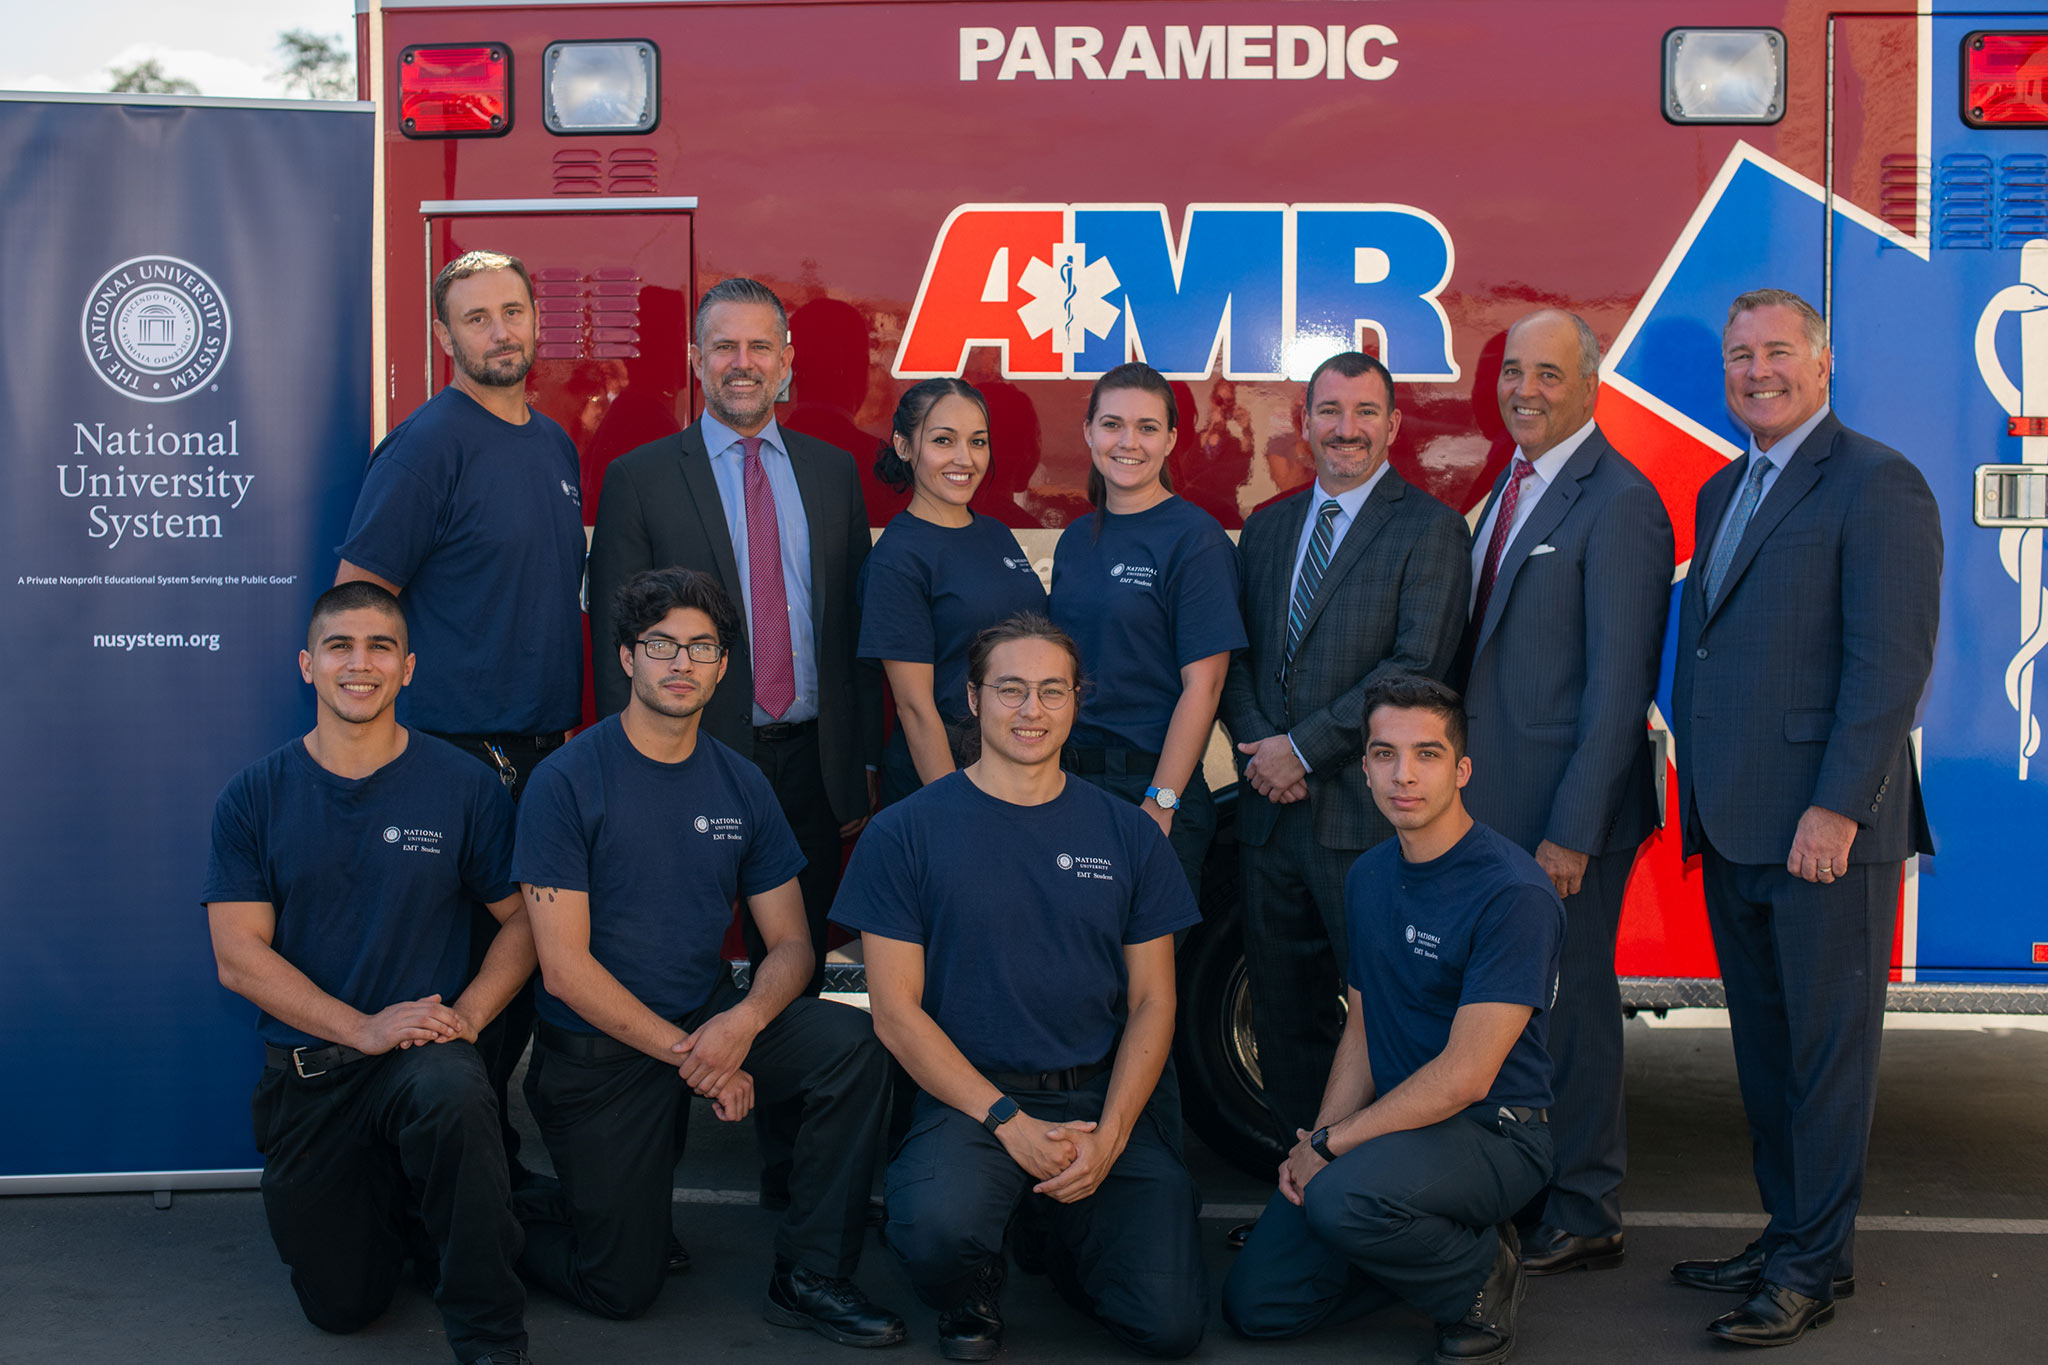 National University Advances Support of Workforce Development Through Partnership with American Medical Response